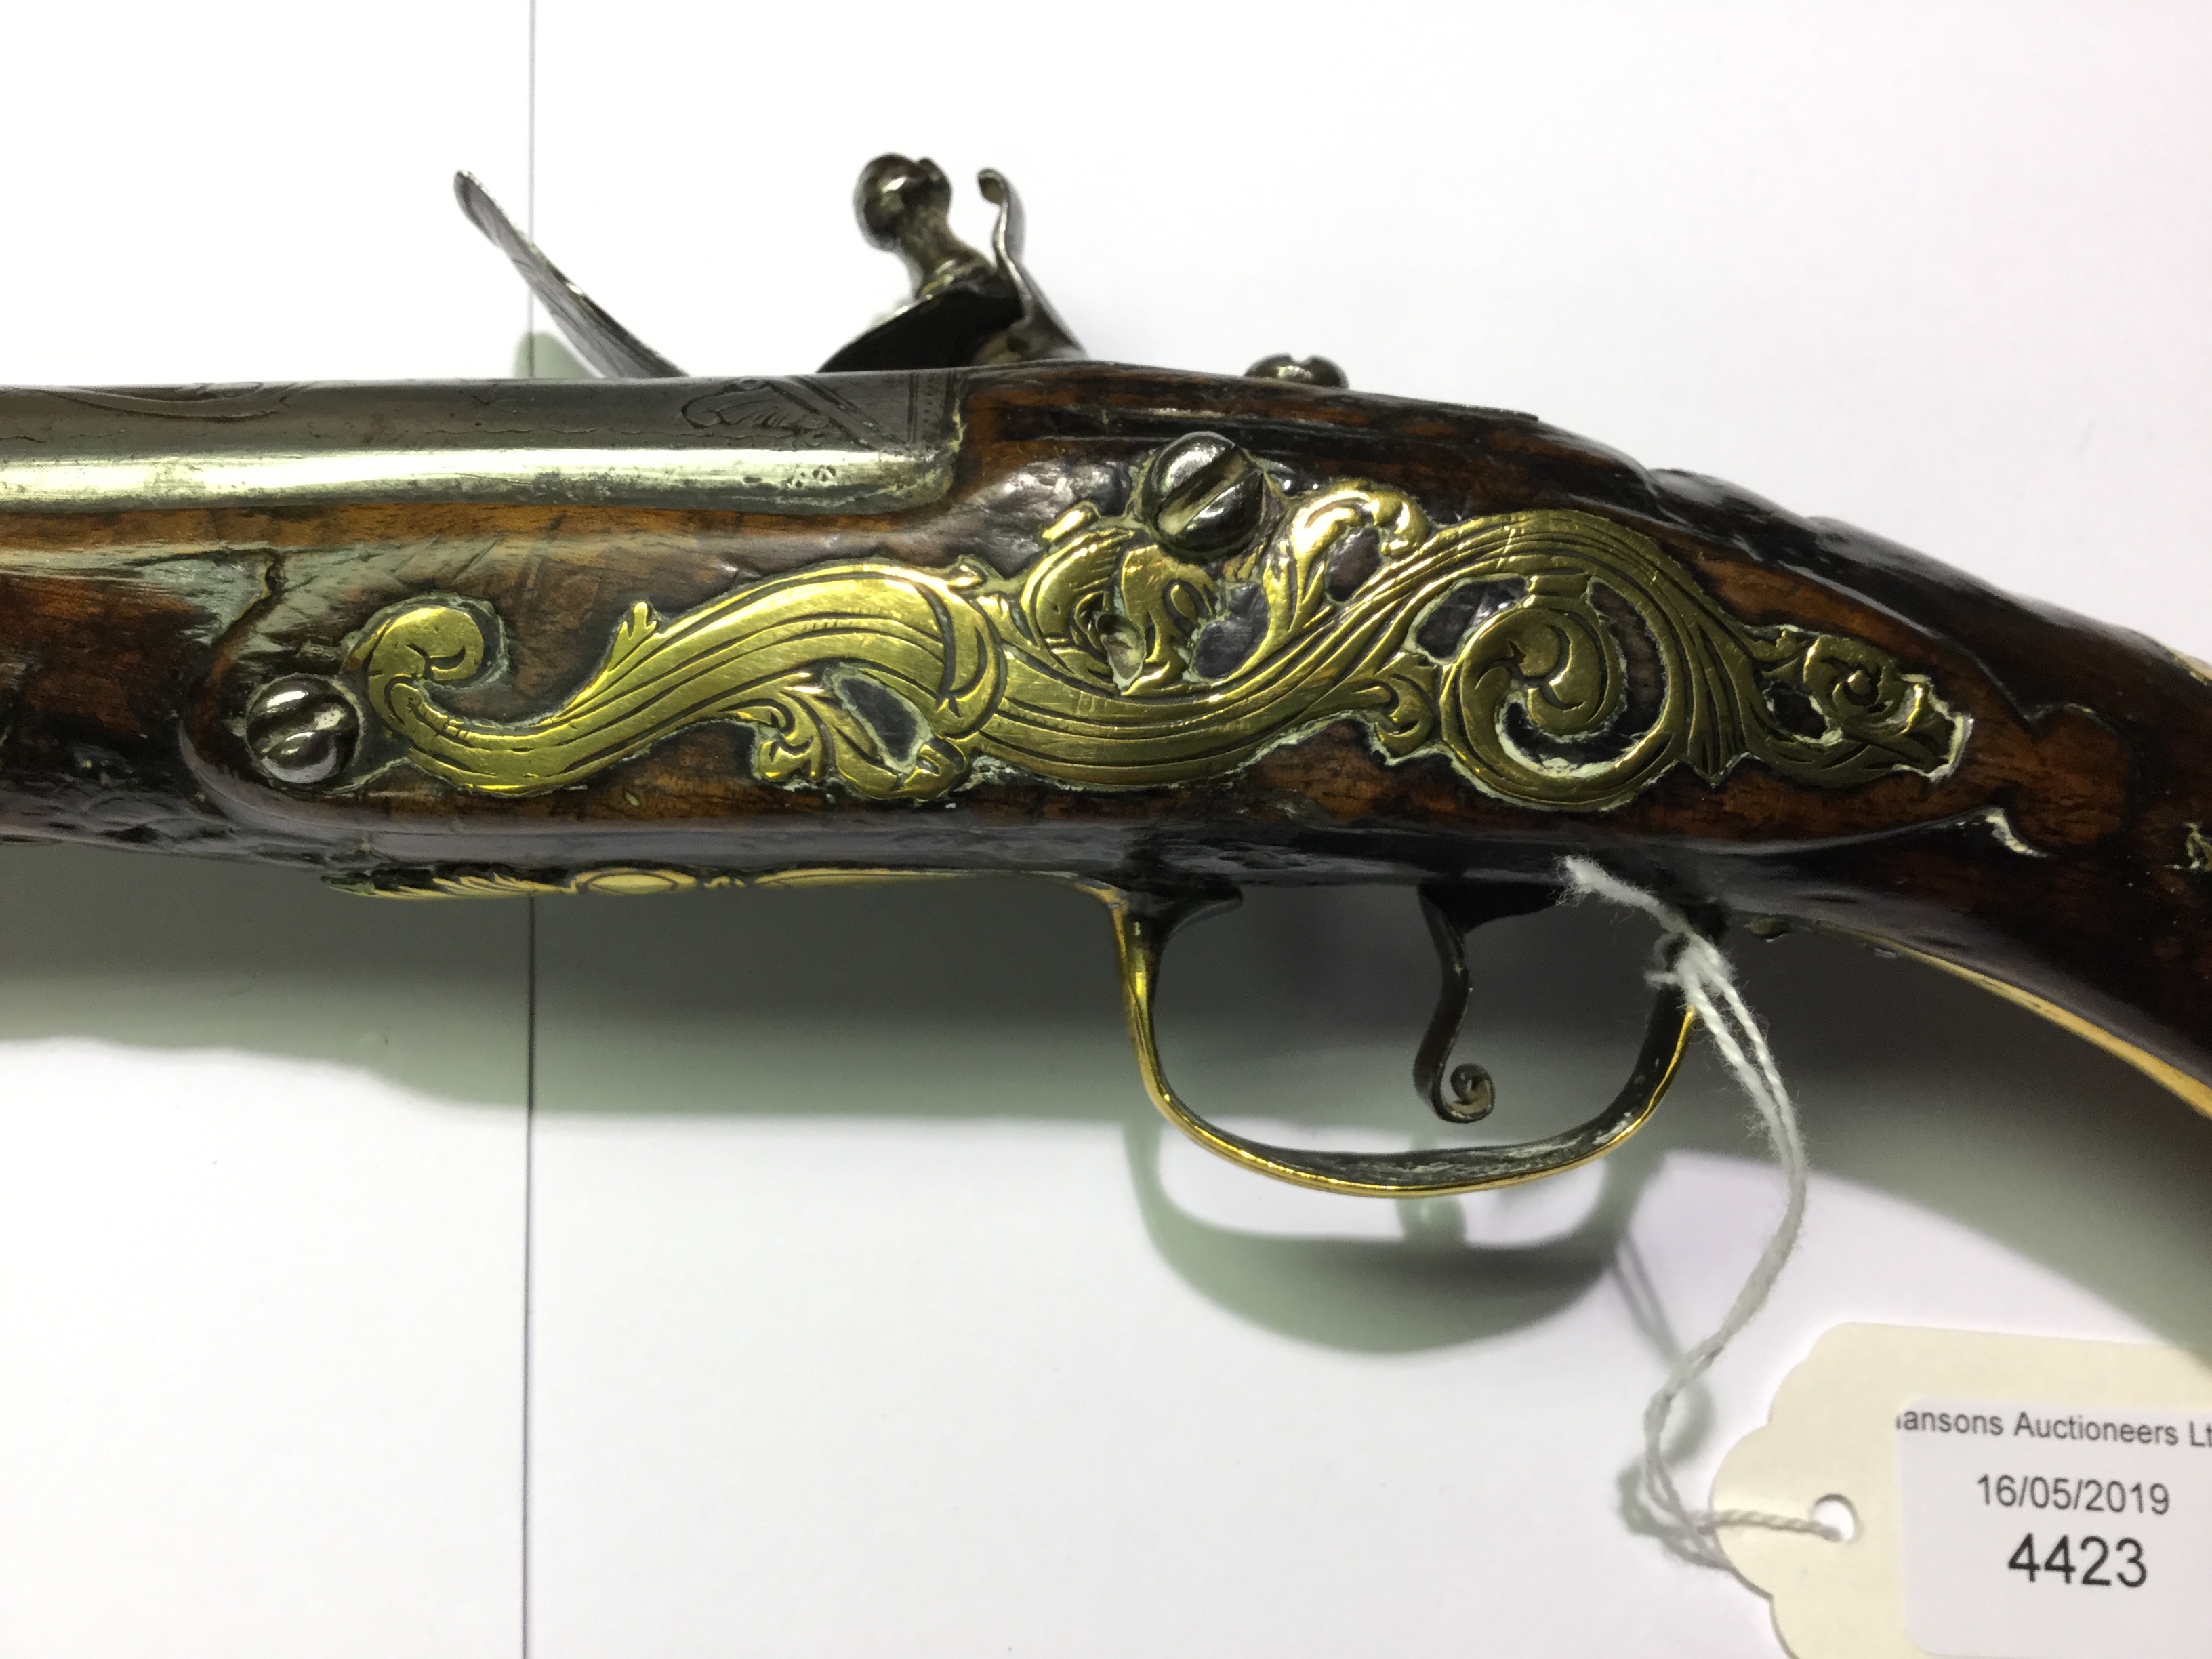 Flintlock pistol with 300mm long barrel. Engraved barrel with grotesque mask. - Image 7 of 9